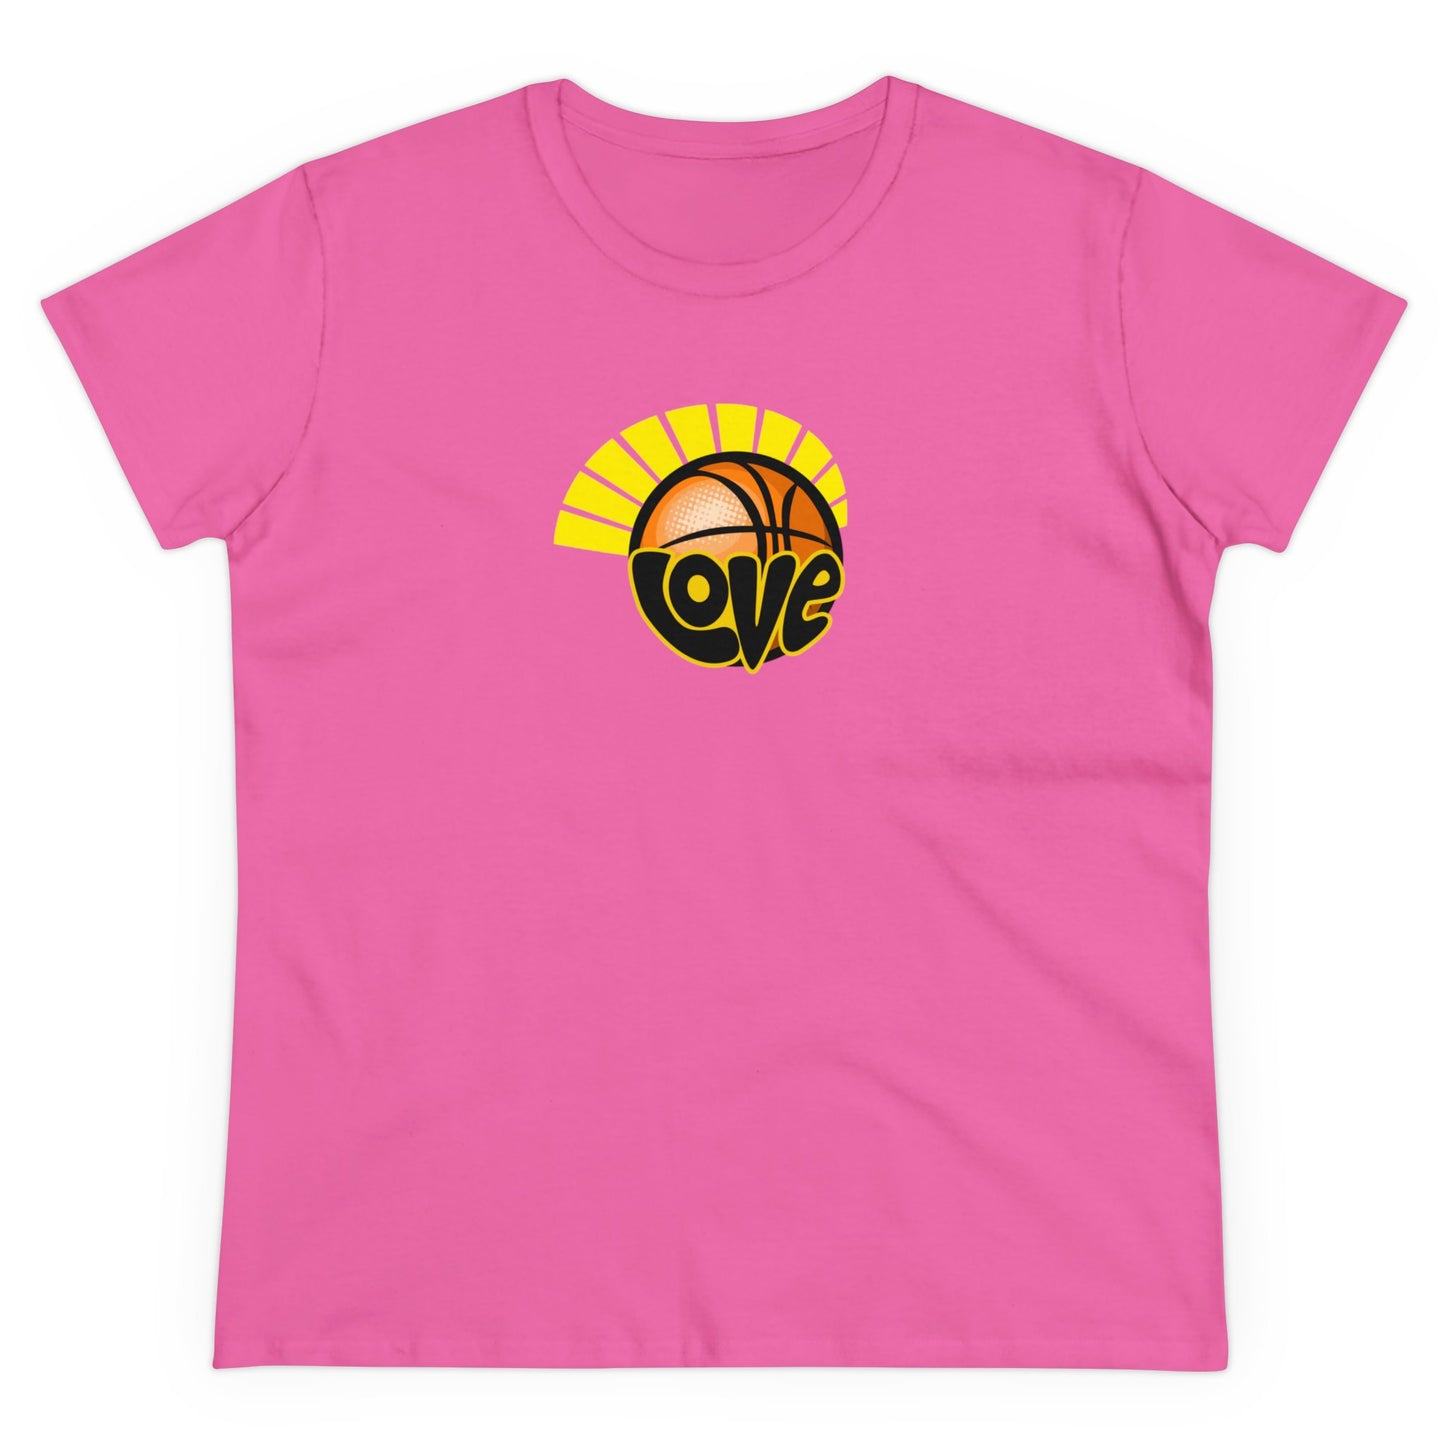 Love of Basketball, Women's Retro Hippy, Feel Good, Midweight Cotton Tee, Cute Ladies Tee, Retro 70's, Pink Basketball T-Shirts for Ladies